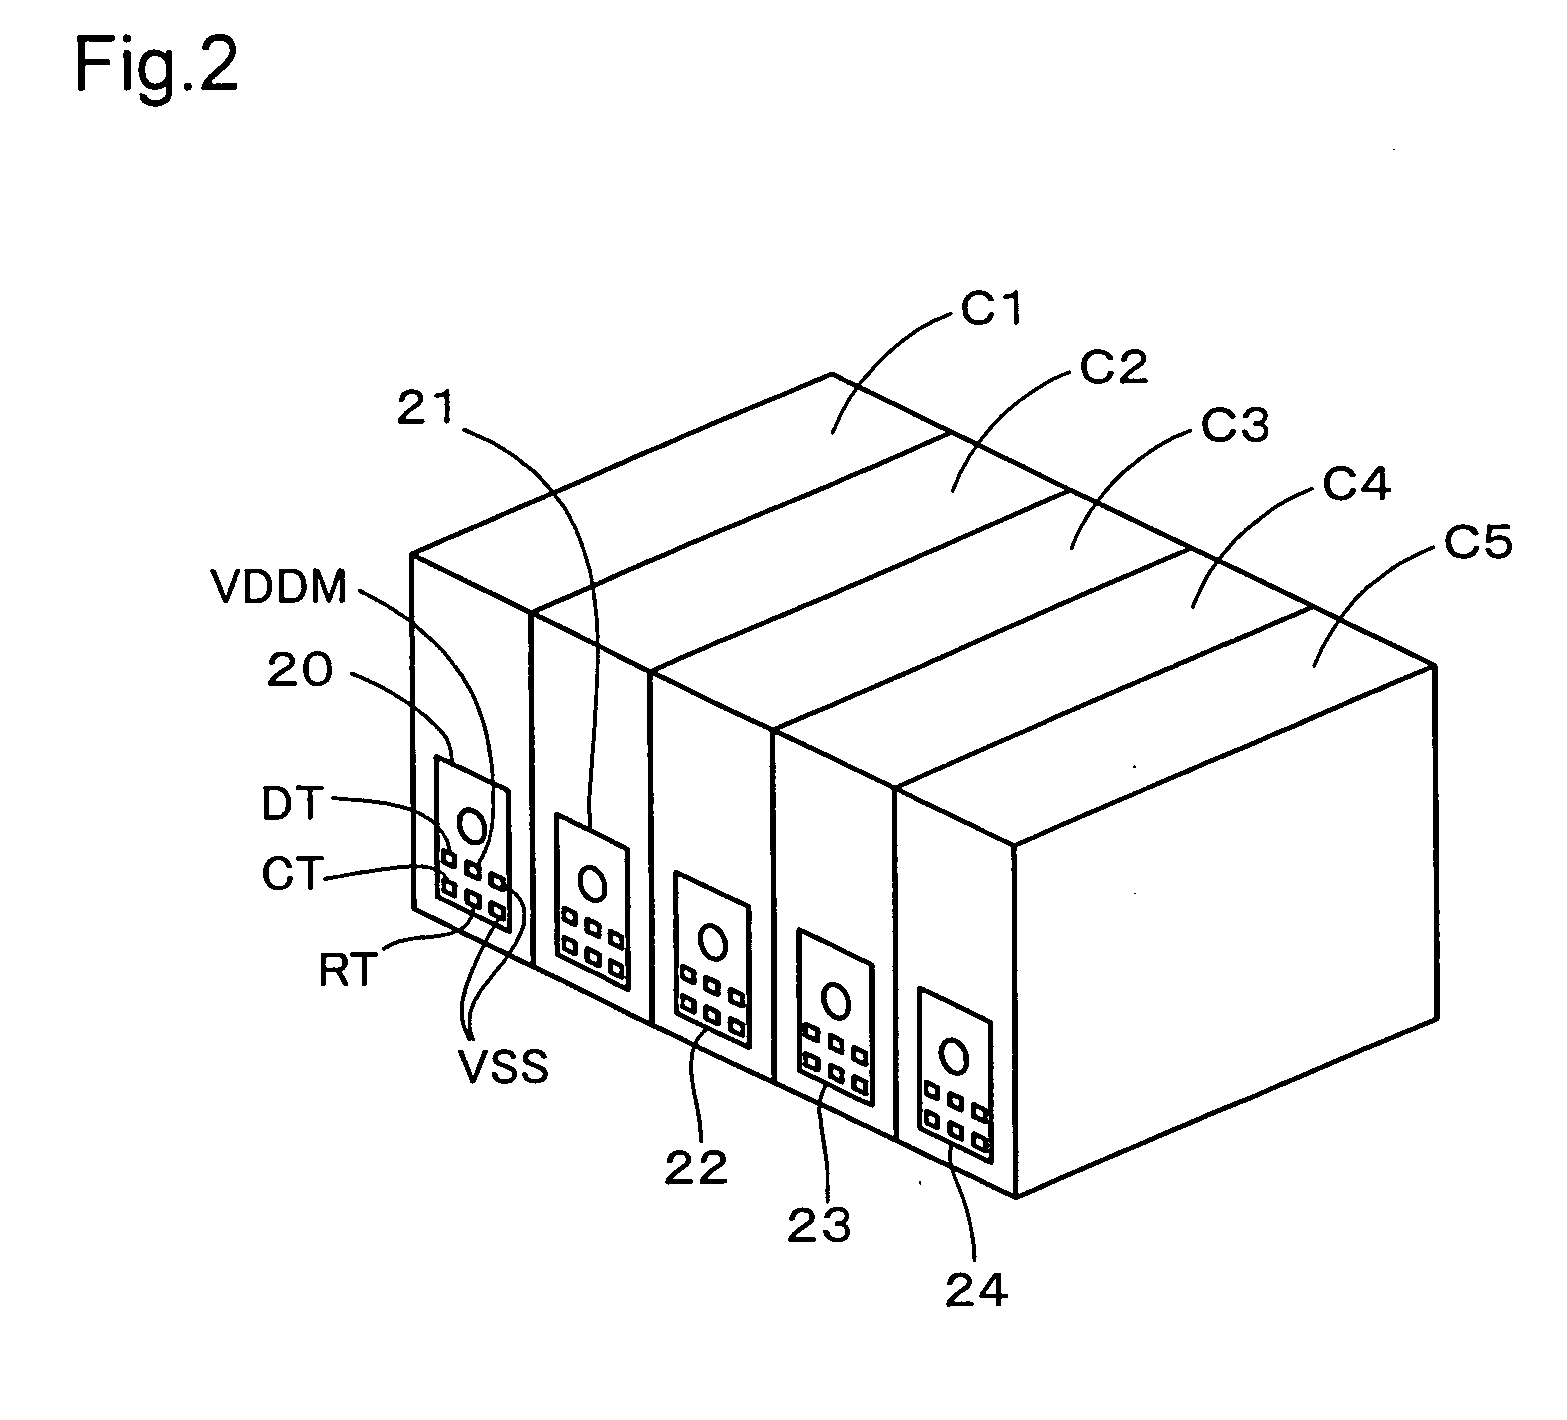 Storage device with protection against inadvertent writing